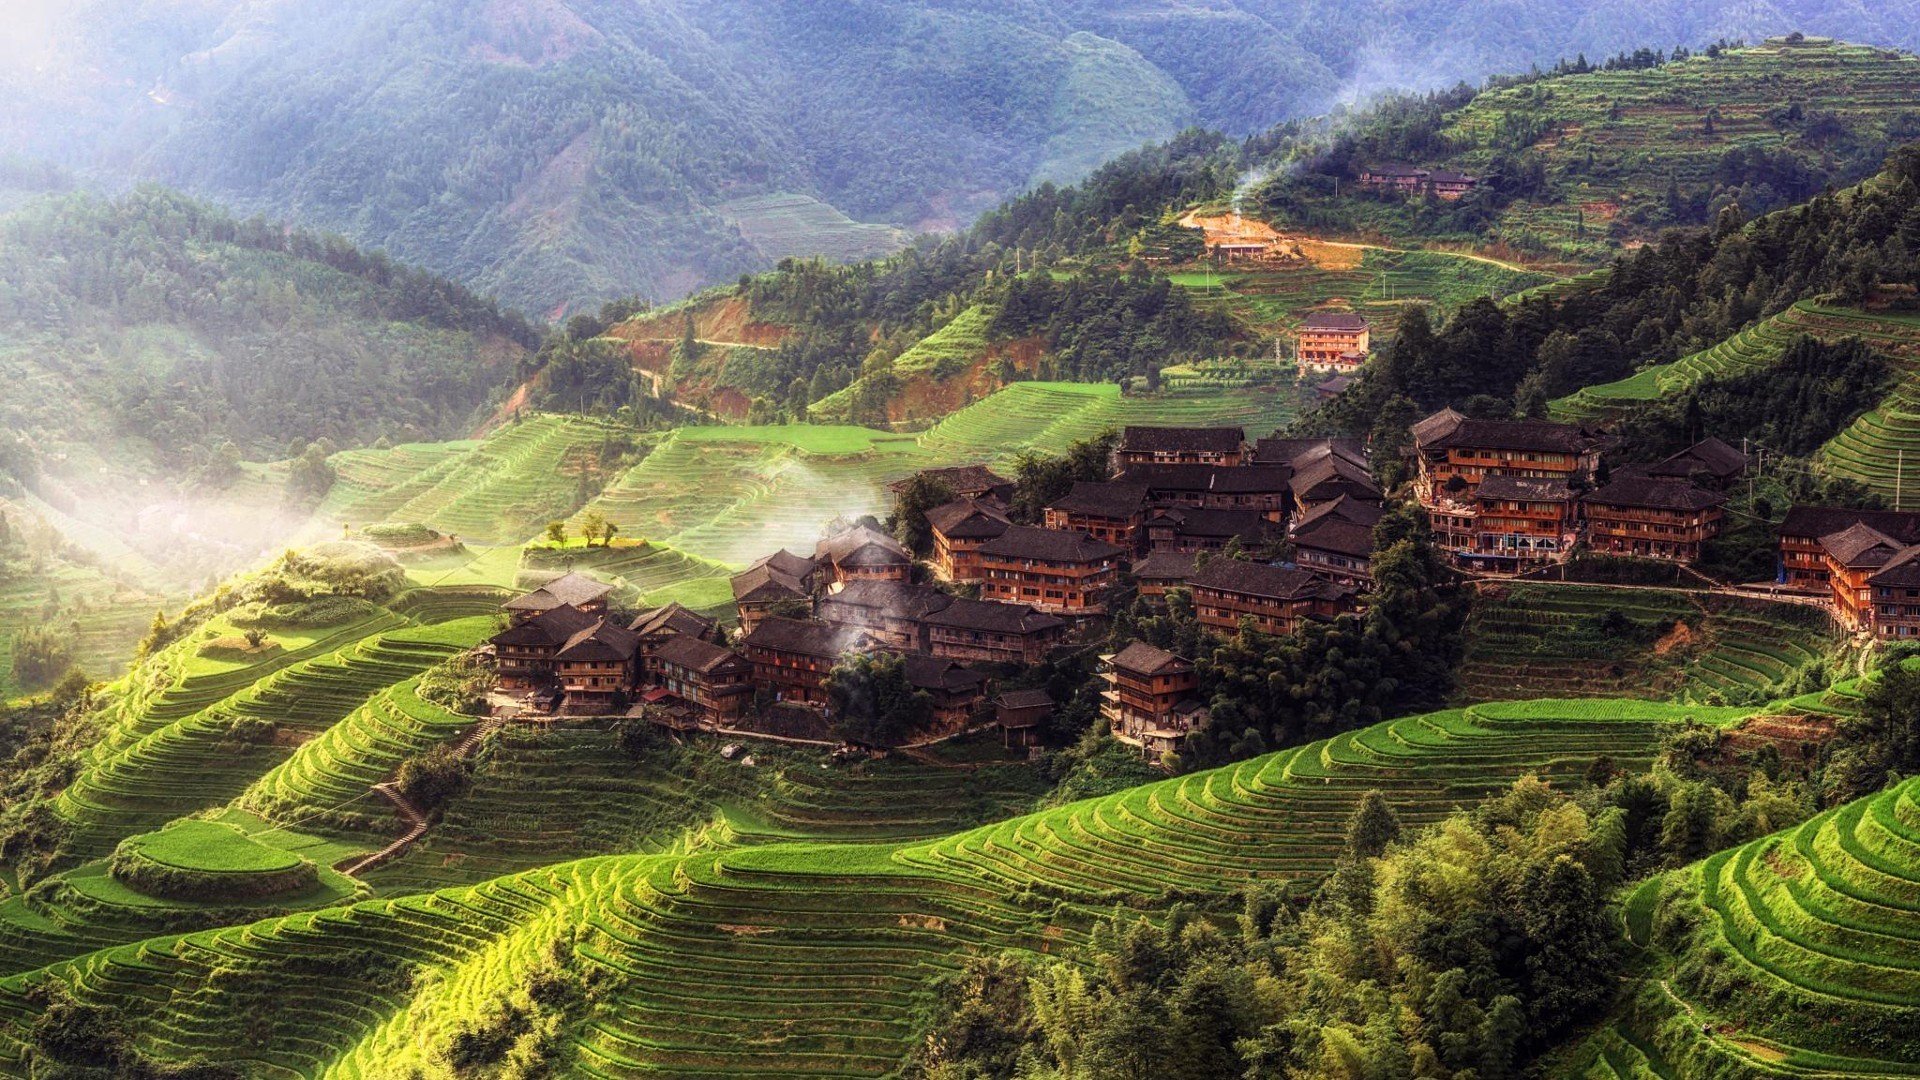 Wallpaper, 1920x1080 px, Asia, China, forest, hill, house, landscape, mist, morning, nature, rice paddy, terraced field, trees, village 1920x1080